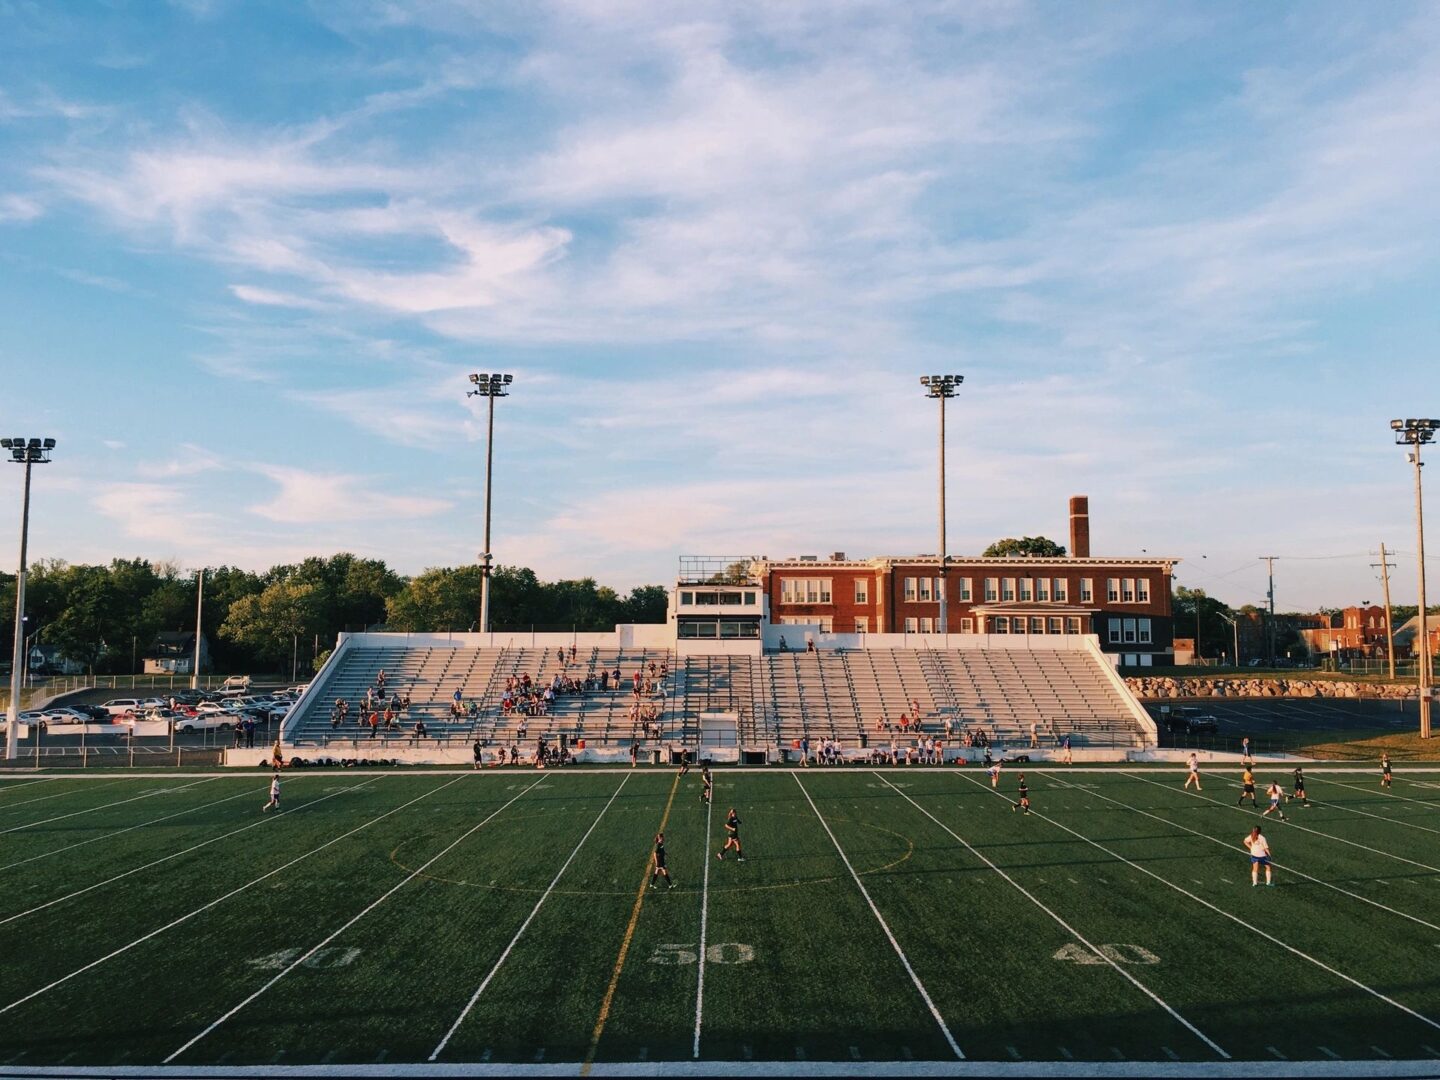 A football field with bleachers and fans in the background.